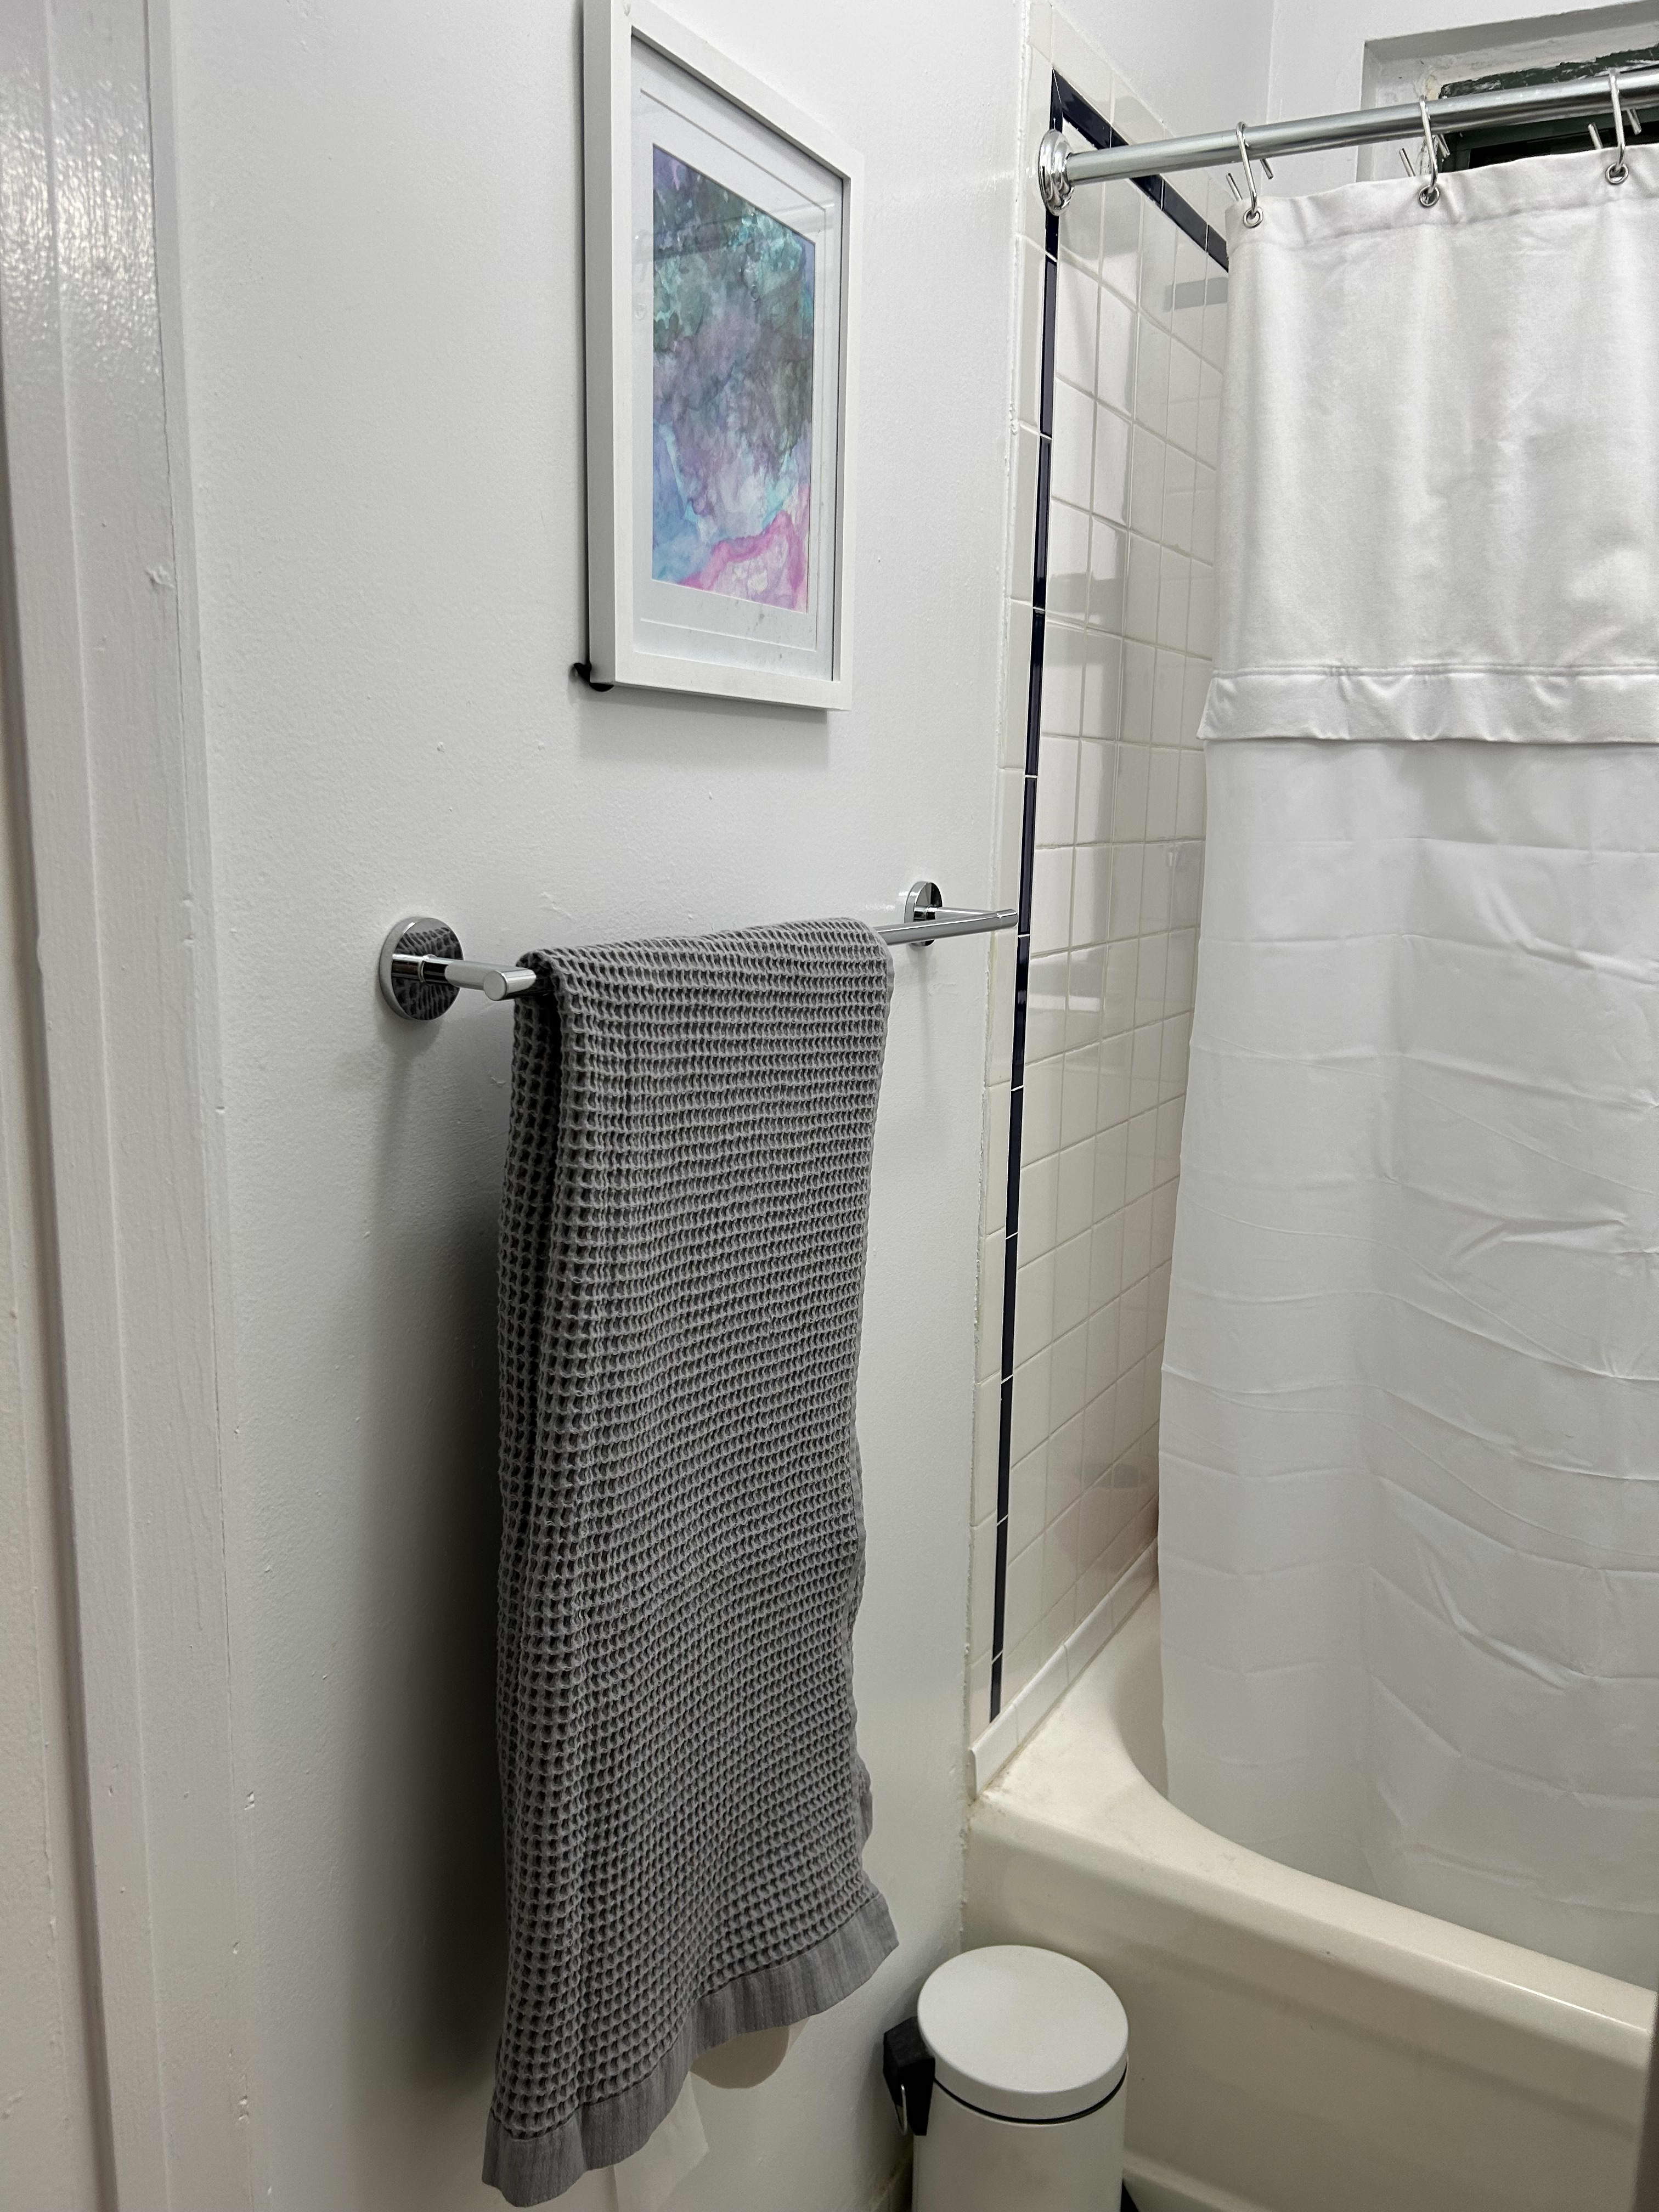 https://cdn.apartmenttherapy.info/image/upload/v1674838724/at/quince-bath-waffle-towel-review.jpg